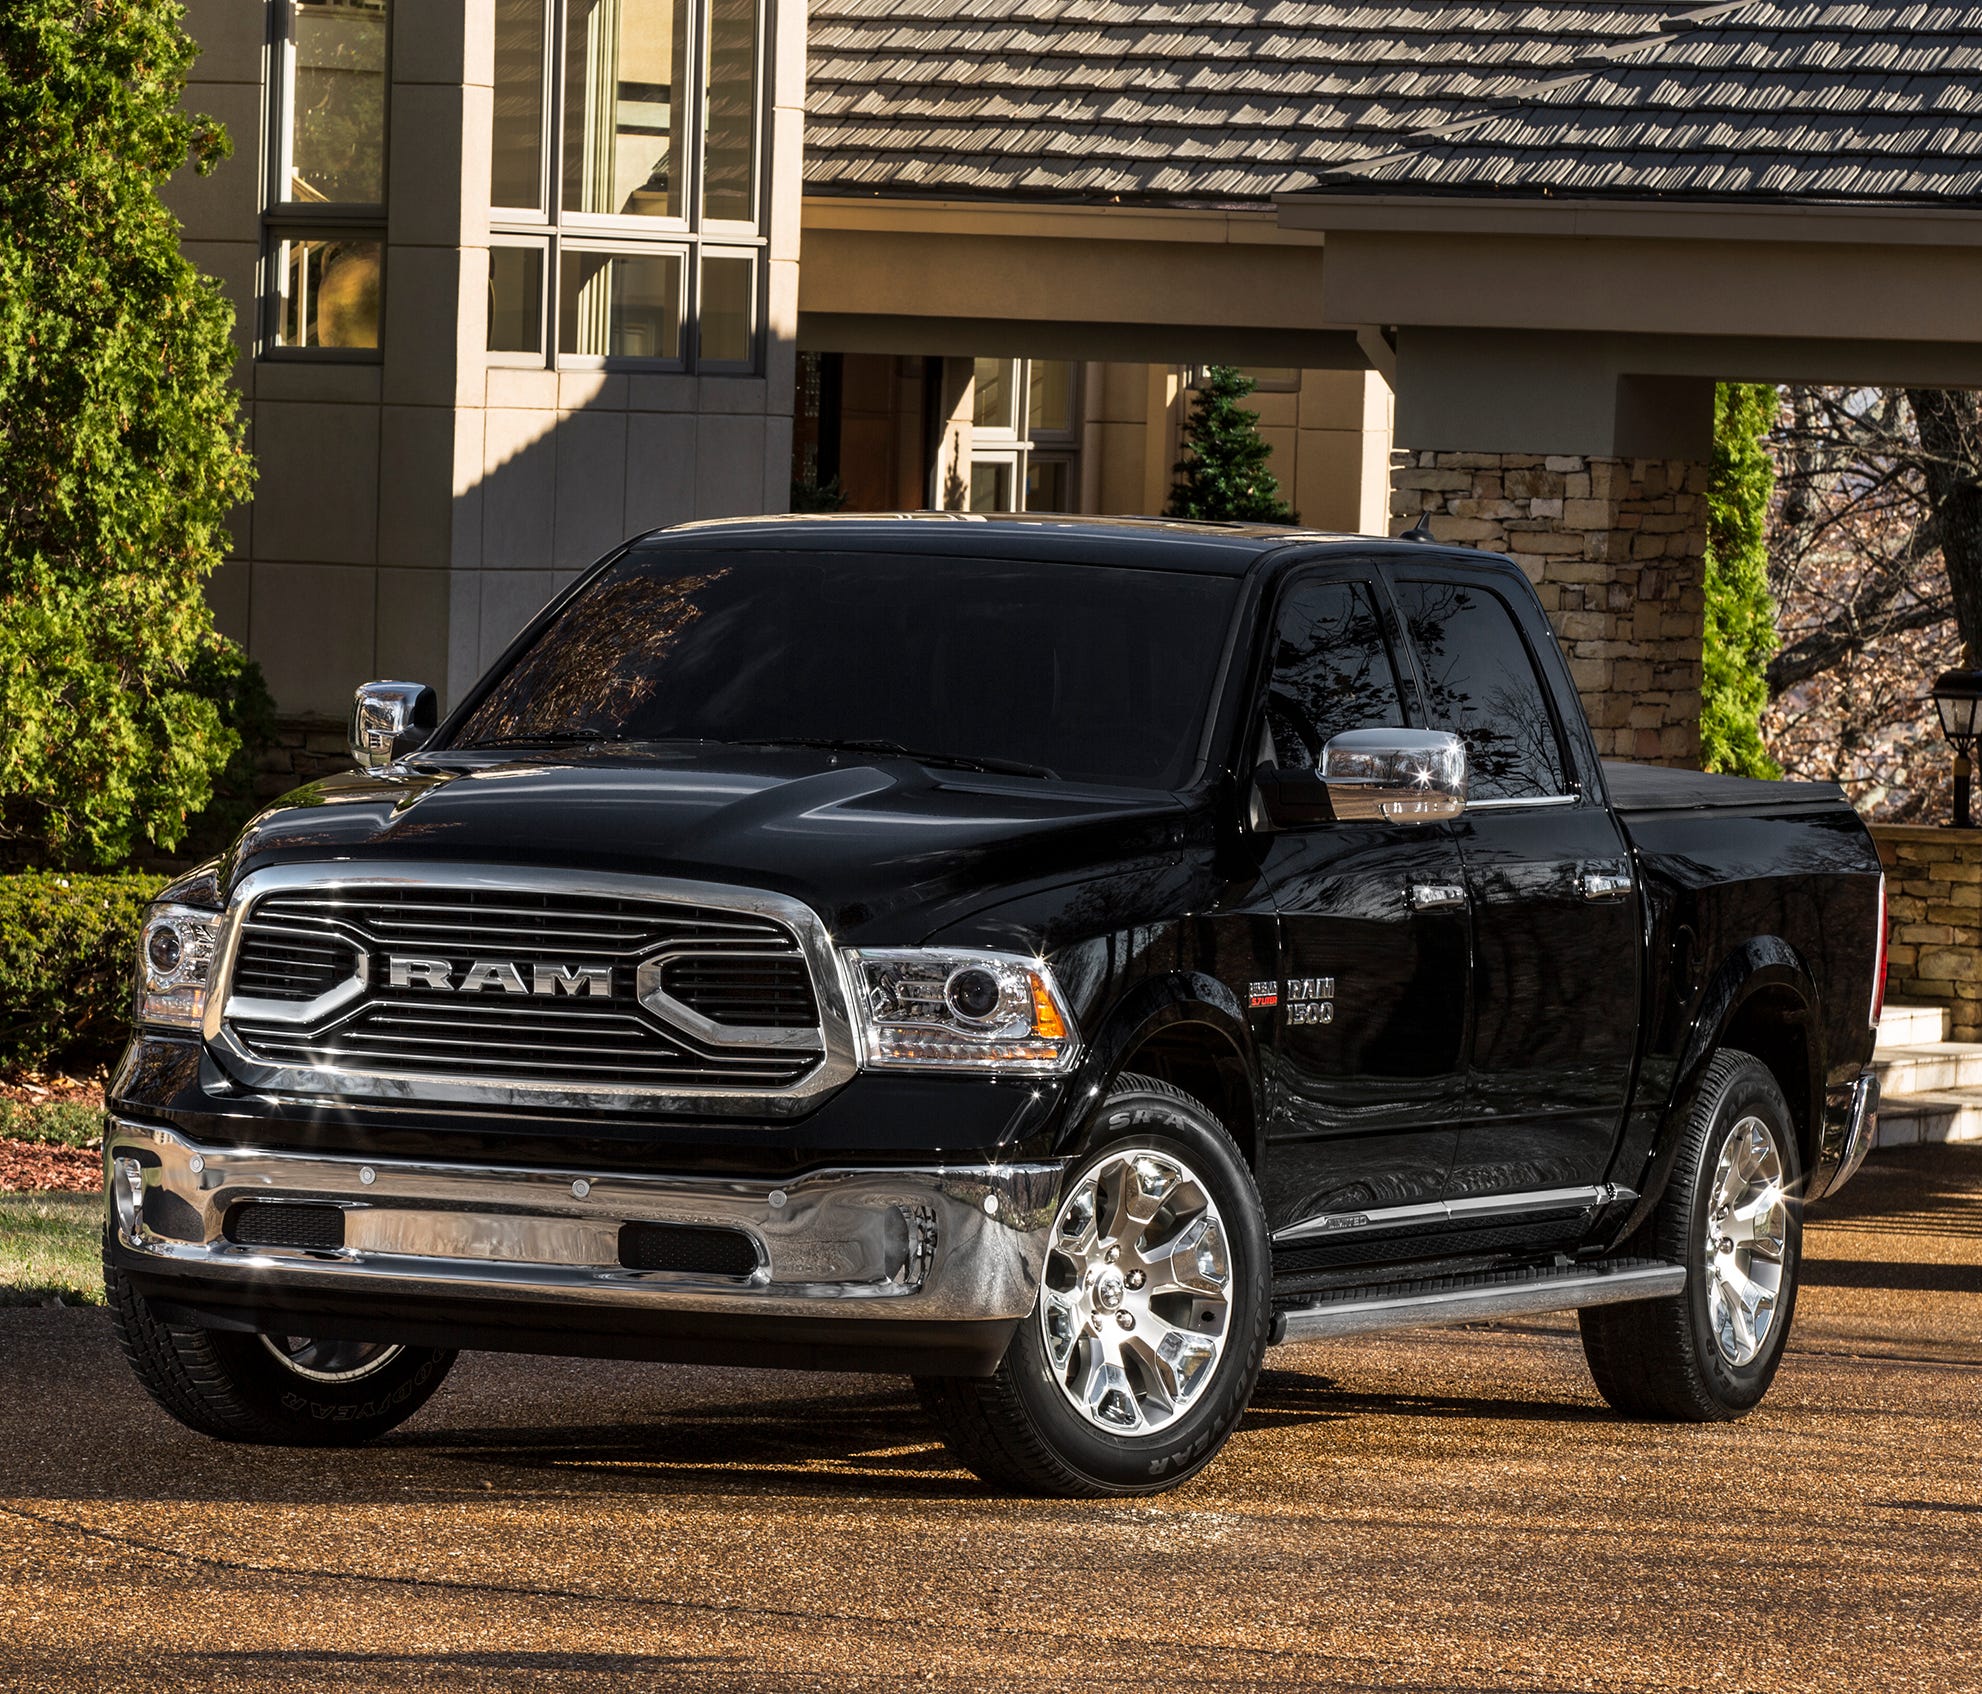 The 2018 Ram 1500, which has a significant discount going into Labor Day weekend. The Ram 1500 has several attractive qualities, including the most comfortable ride you can get in a truck.